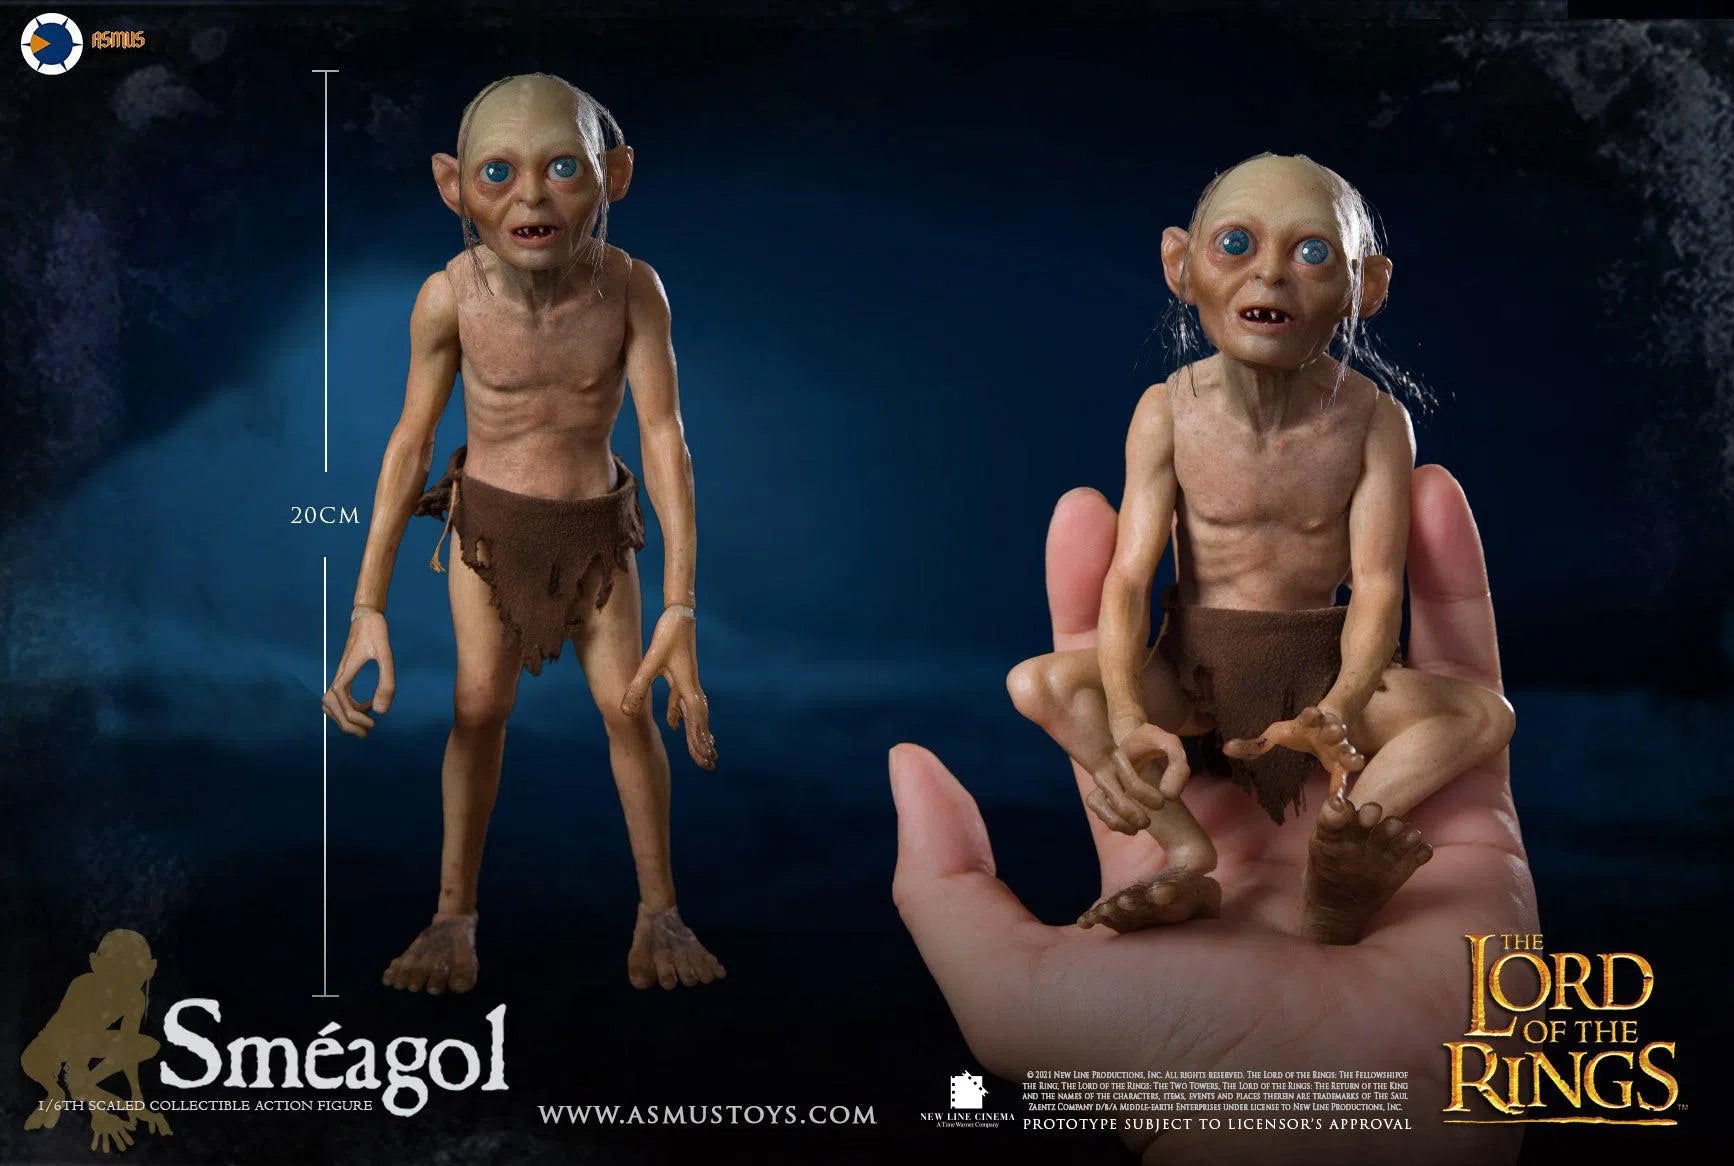 Gollum and Sméagol: Double Pack: Lord Of The Rings: Luxury Edition: Asmus: LOTR30LUX